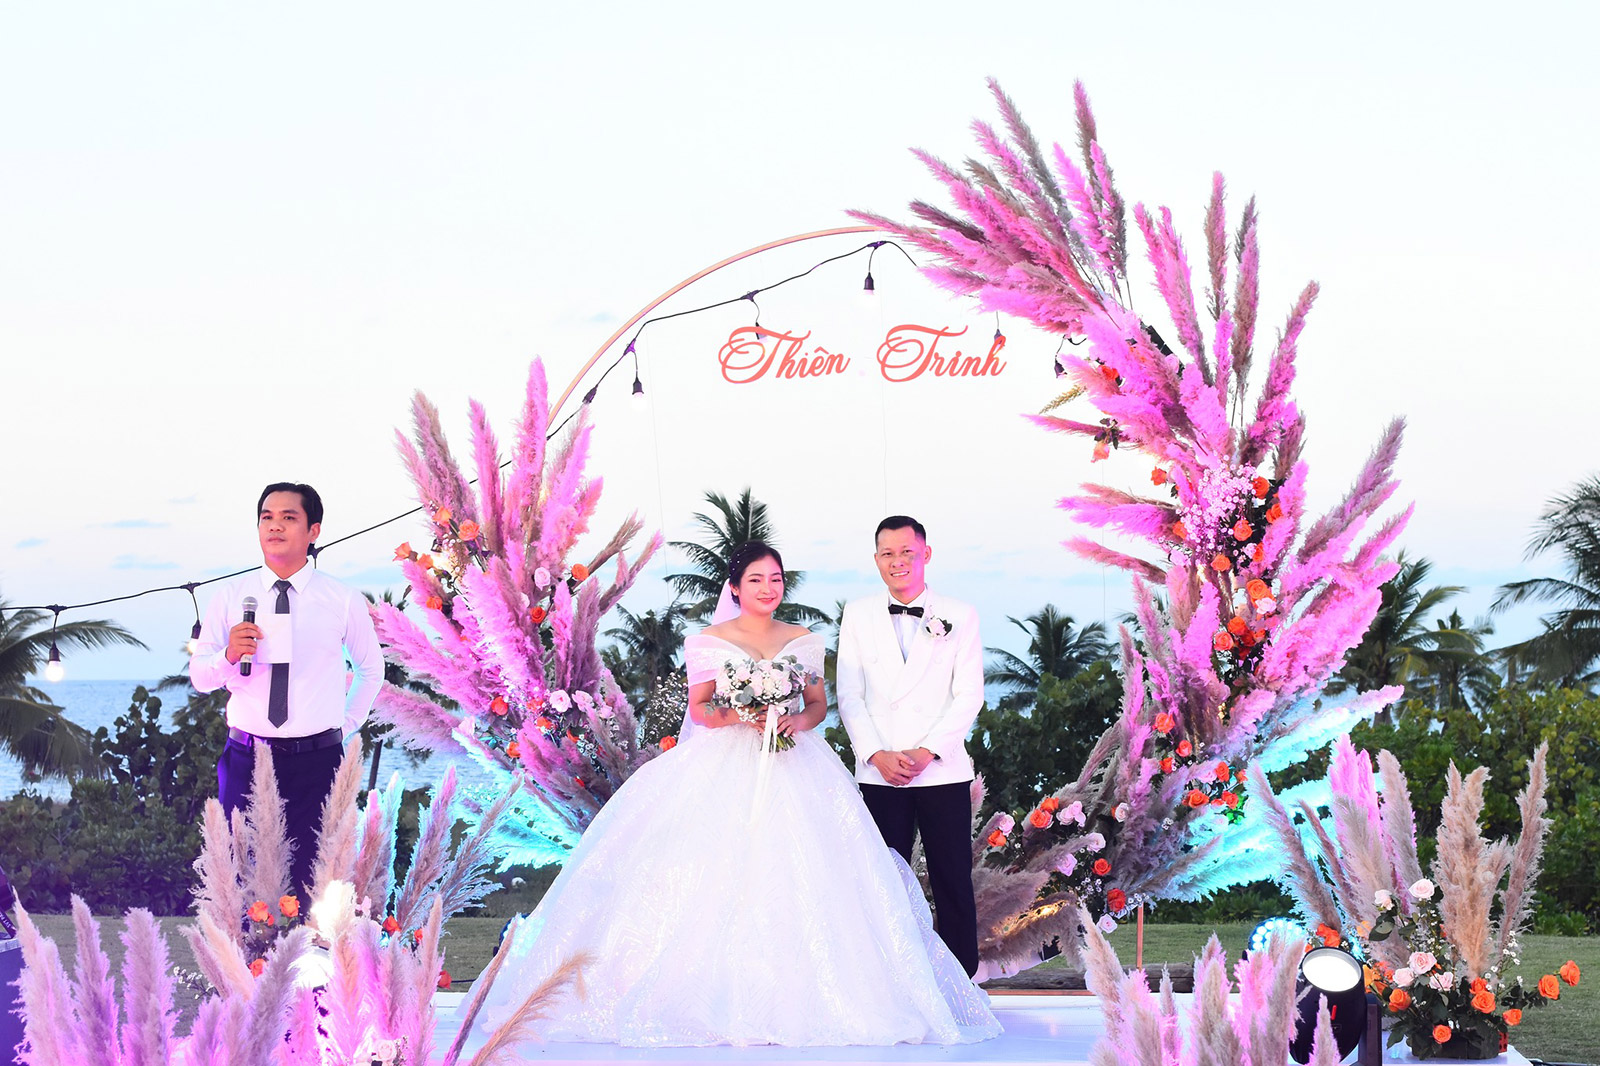 A PICTURESQUE WEDDING CEREMONY QUOC THIEN - TO TRINH AT ARIYANA CONVENTION CENTRE DANANG